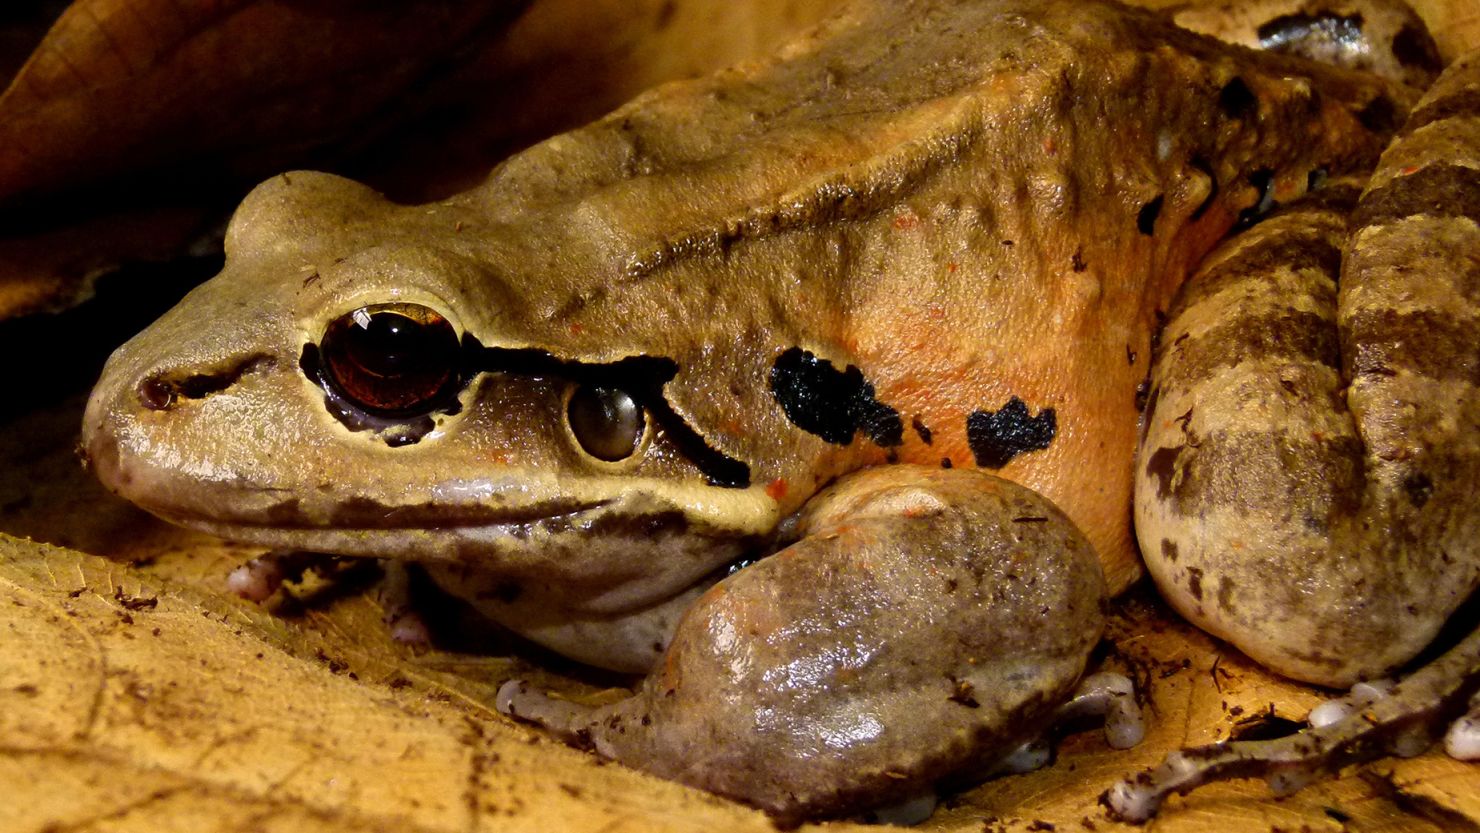 Once abundant in the Caribbean, only 21 mountain chicken frogs were found remaining in the wild, according to a new survey. The species is one of the largest frogs in the world.